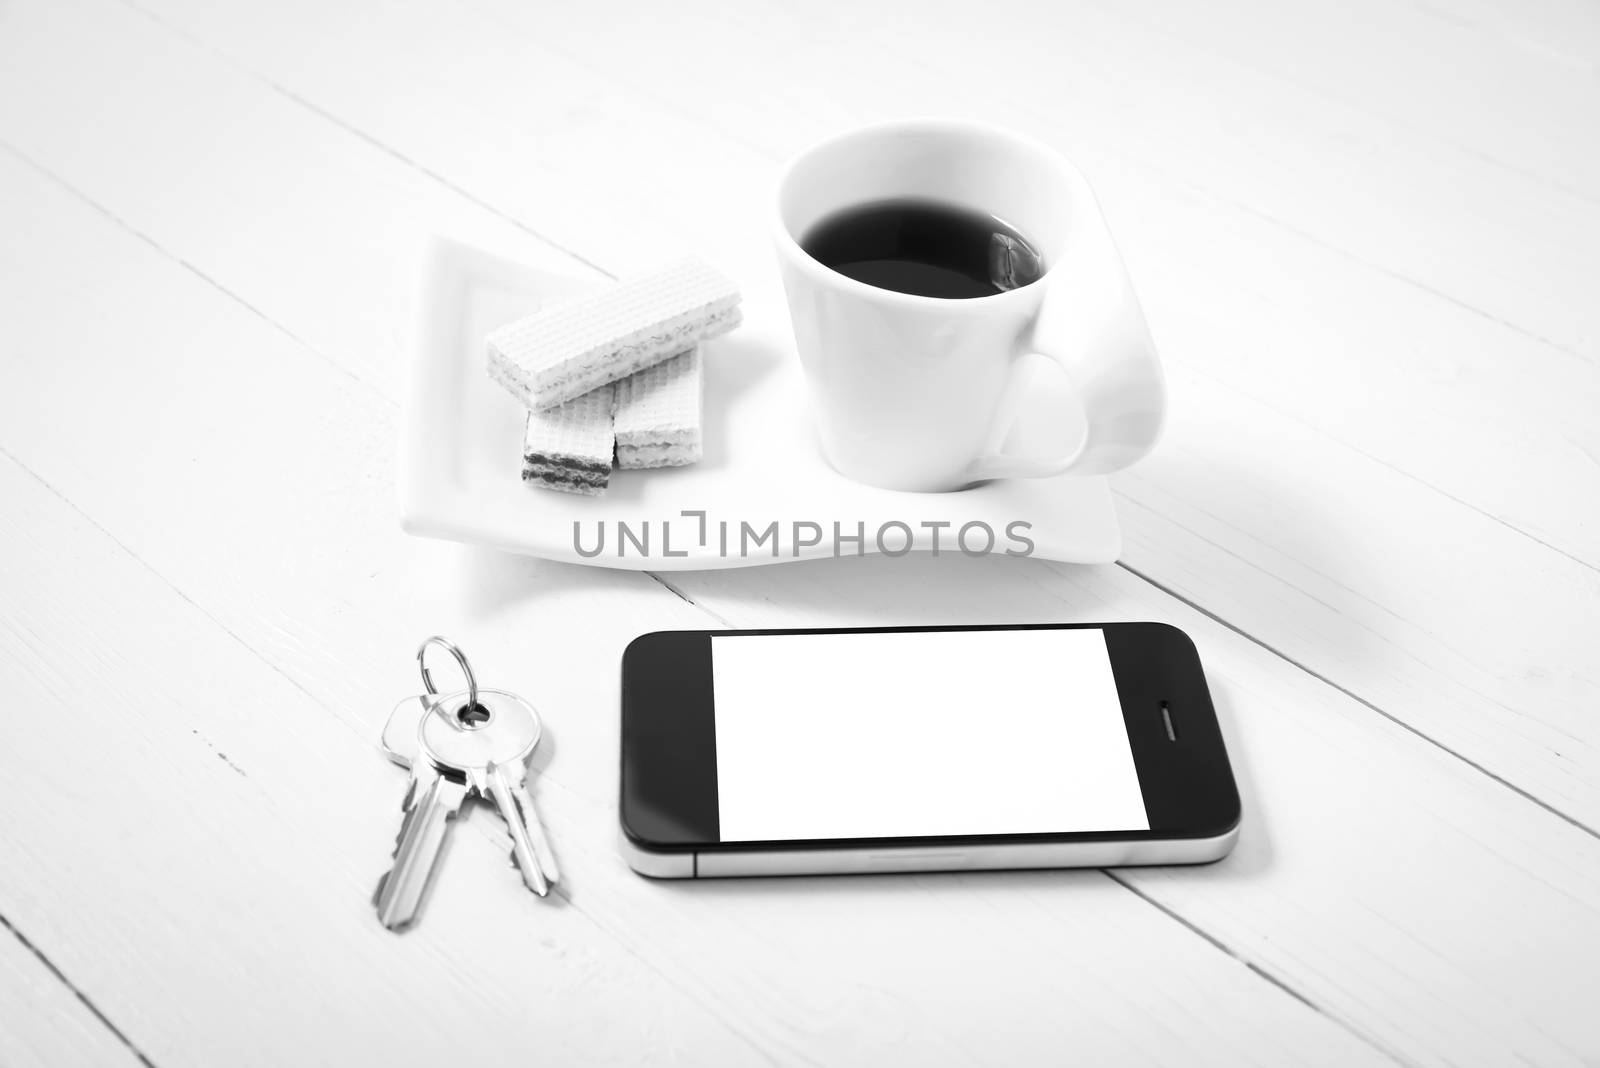 coffee cup with wafer,phone,key black and white color by ammza12